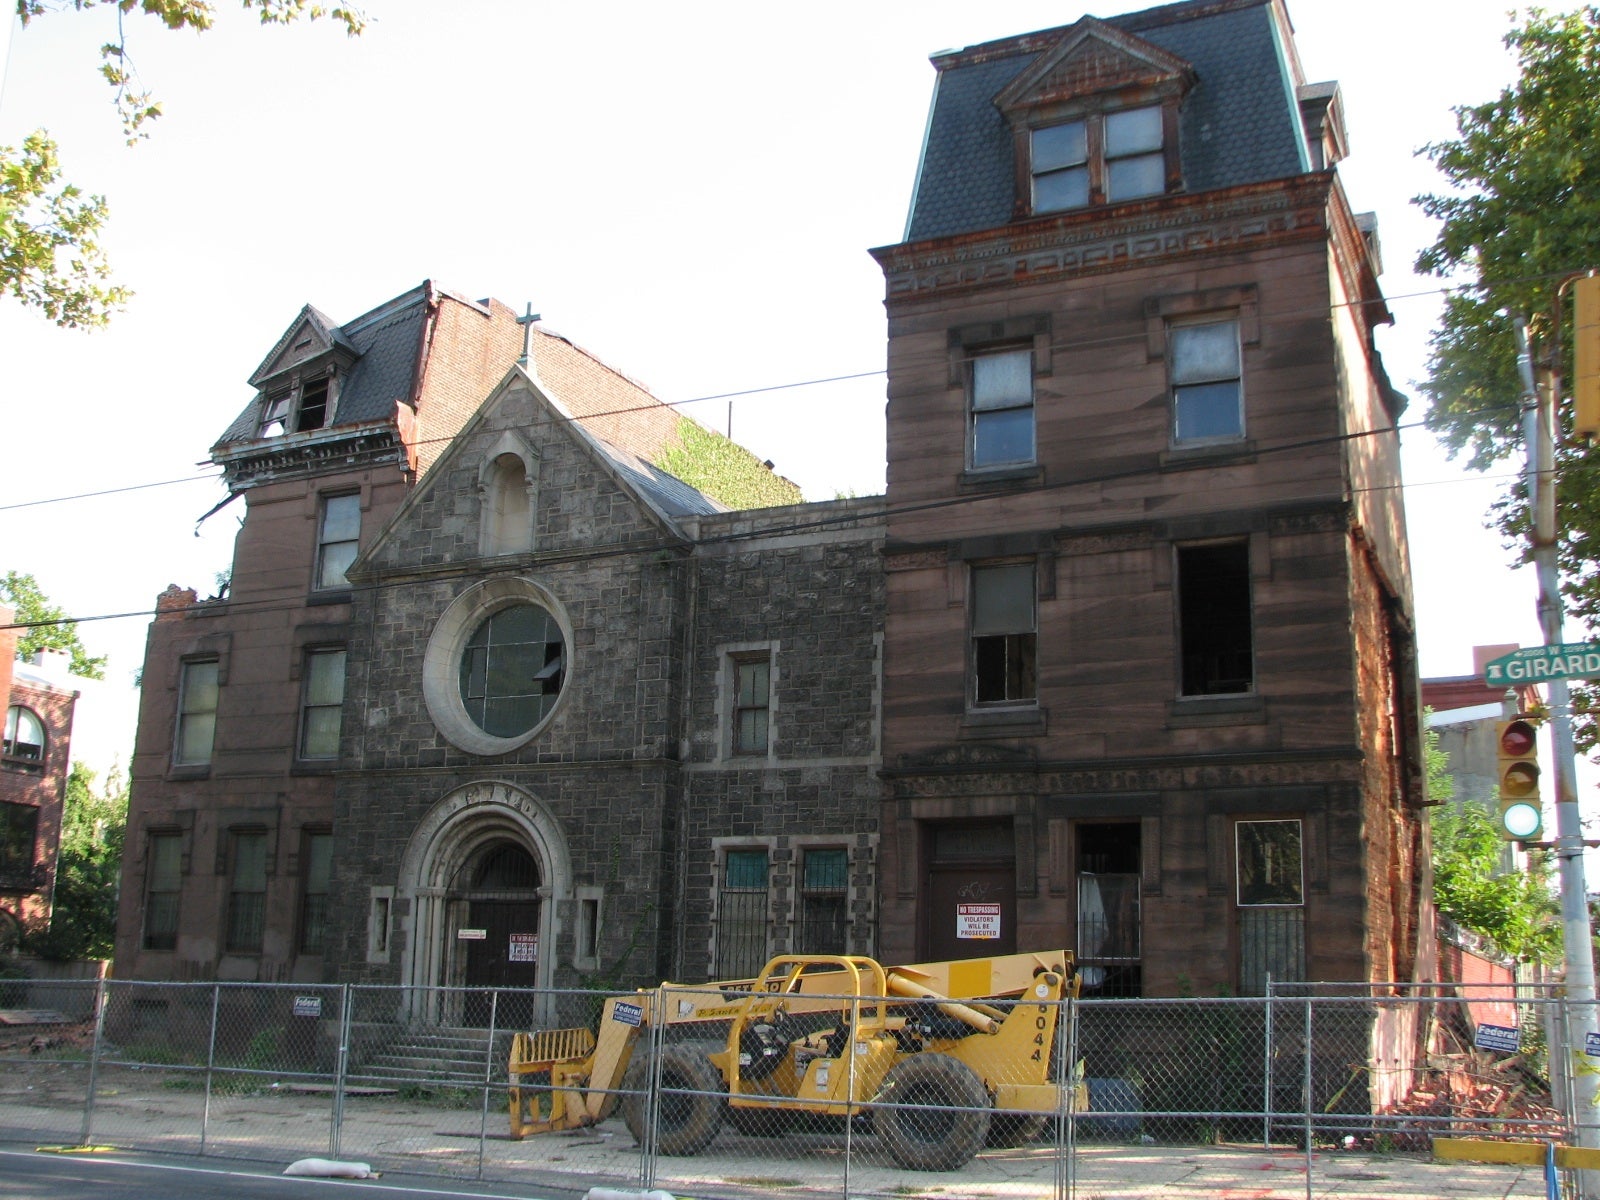 Demolition crews have begun tearing down the two brownstones at 2012-30 West Girard Ave.